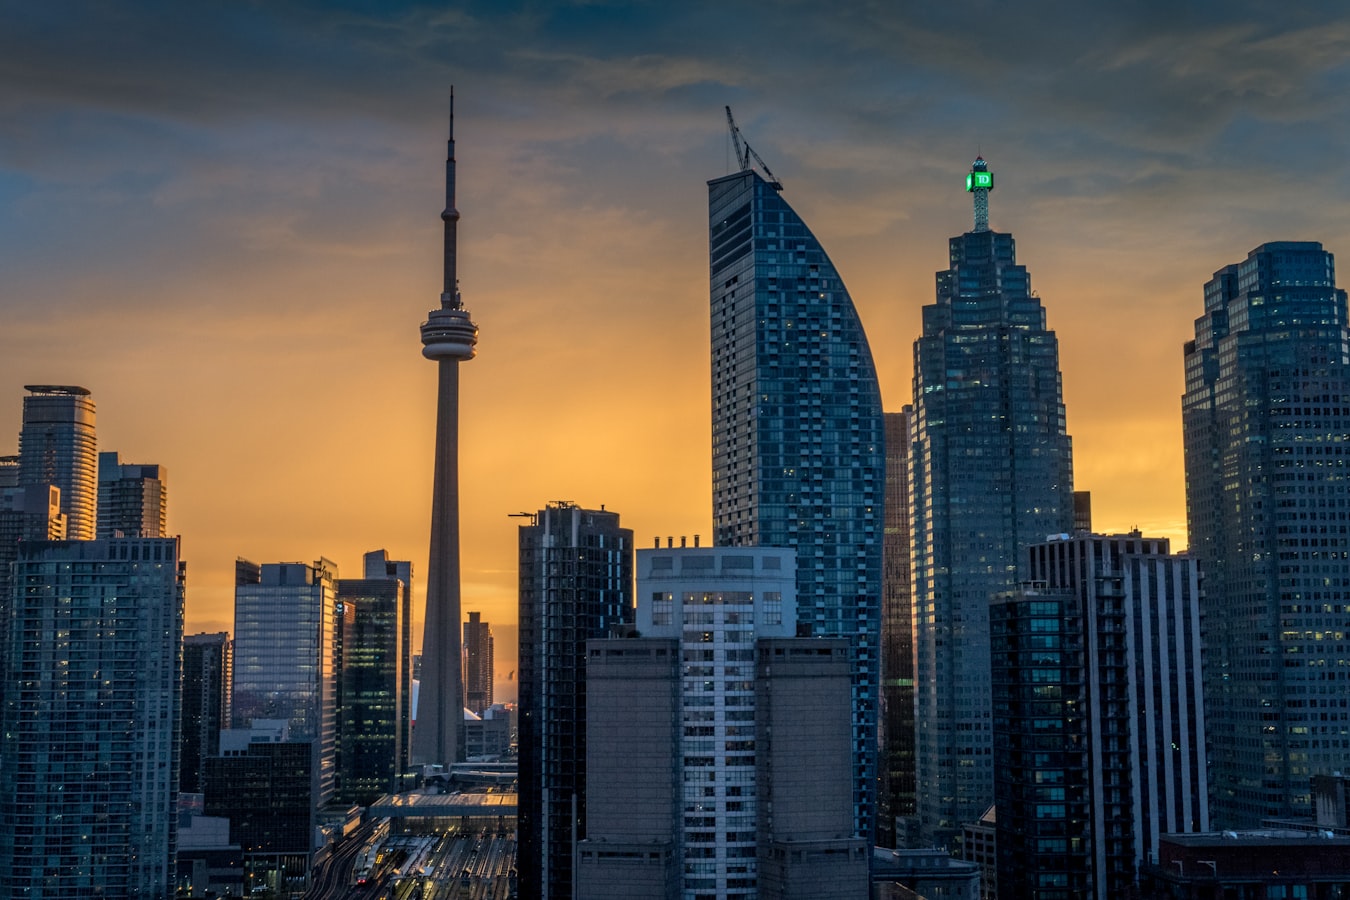 Jethro Seymour, one of the Top Midtown Toronto Real Estate Brokers, provides you with Canadian real estate news headlines (June 7th, 2018)